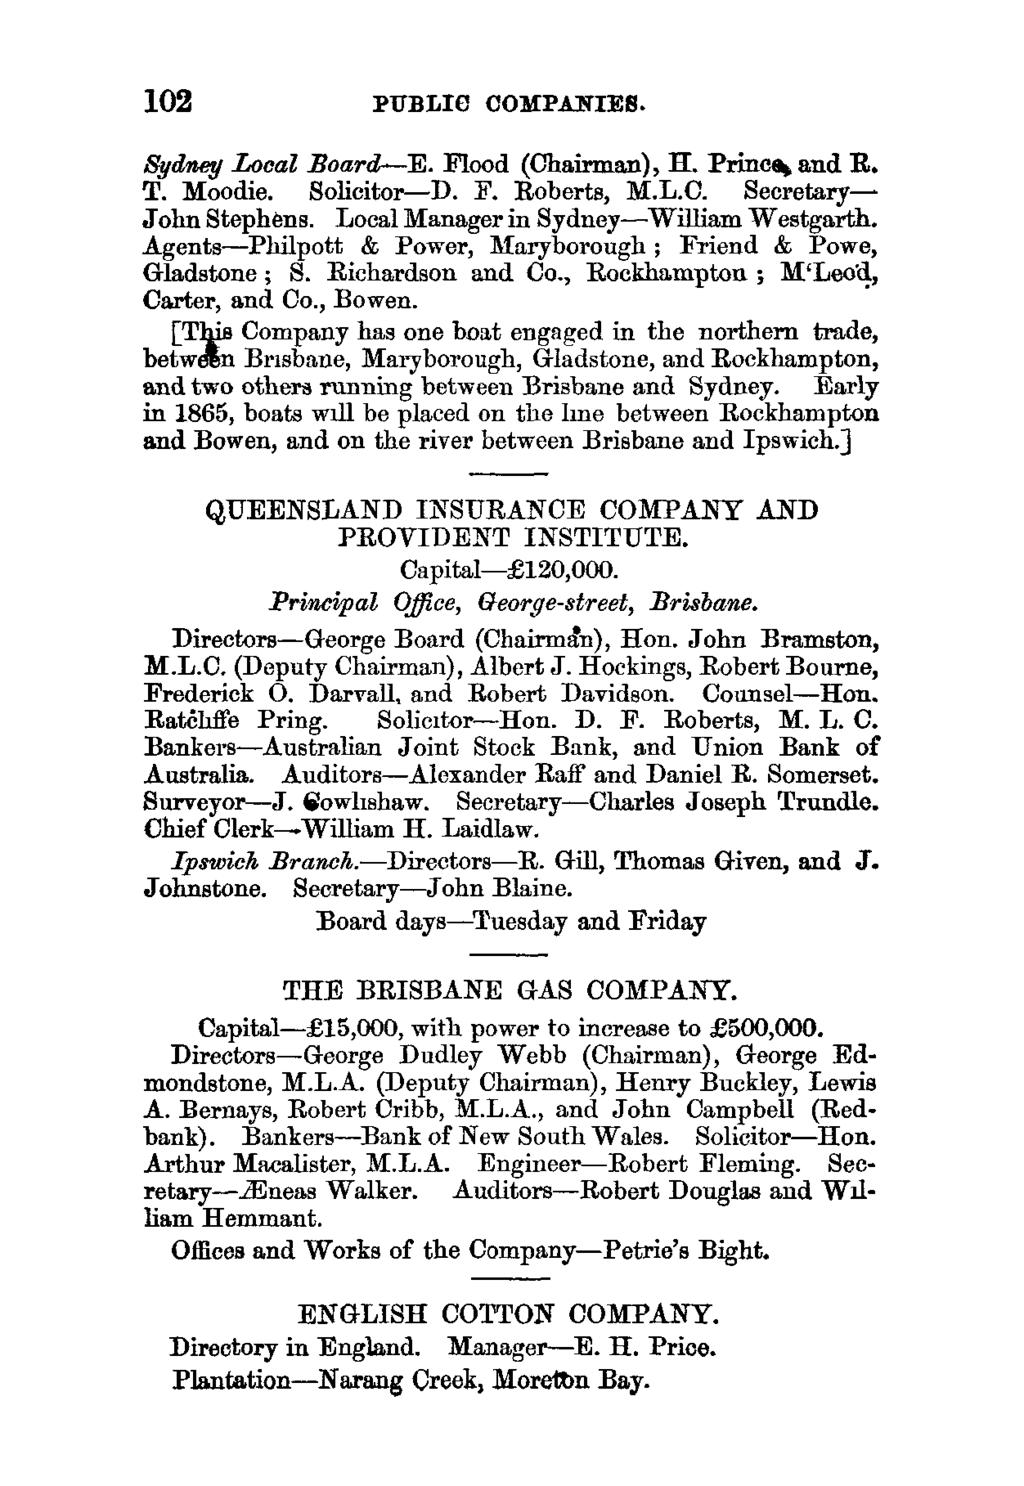 102 PUBLIC COMPANIES. Sydney Local Board-E. Flood (Chairman), H. Prince and R. T. Moodie. Solicitor-D. IF. Roberts, M.L.C. Secretary- John Stephens. Local Manager in Sydney-William Westgarth.